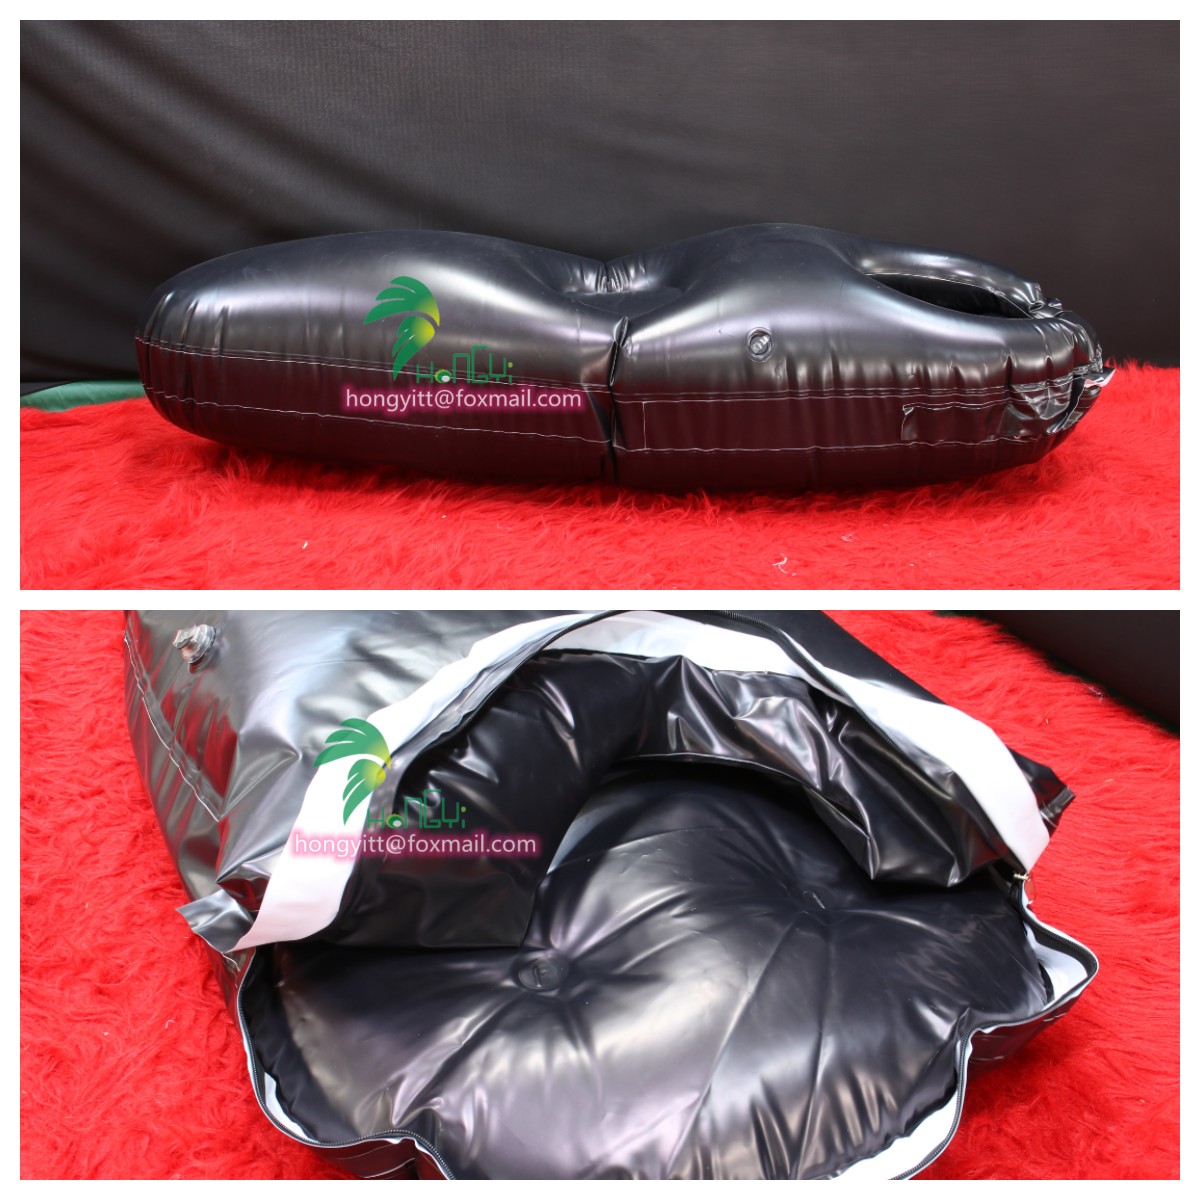 Black color soft and decompression bag😉

#inflatables #custominflatable #hongyi #toys #pvc #animals #pink #sph #bag #bed #sleepingbag #pvcbag
Email: hongyitt@foxmail.com